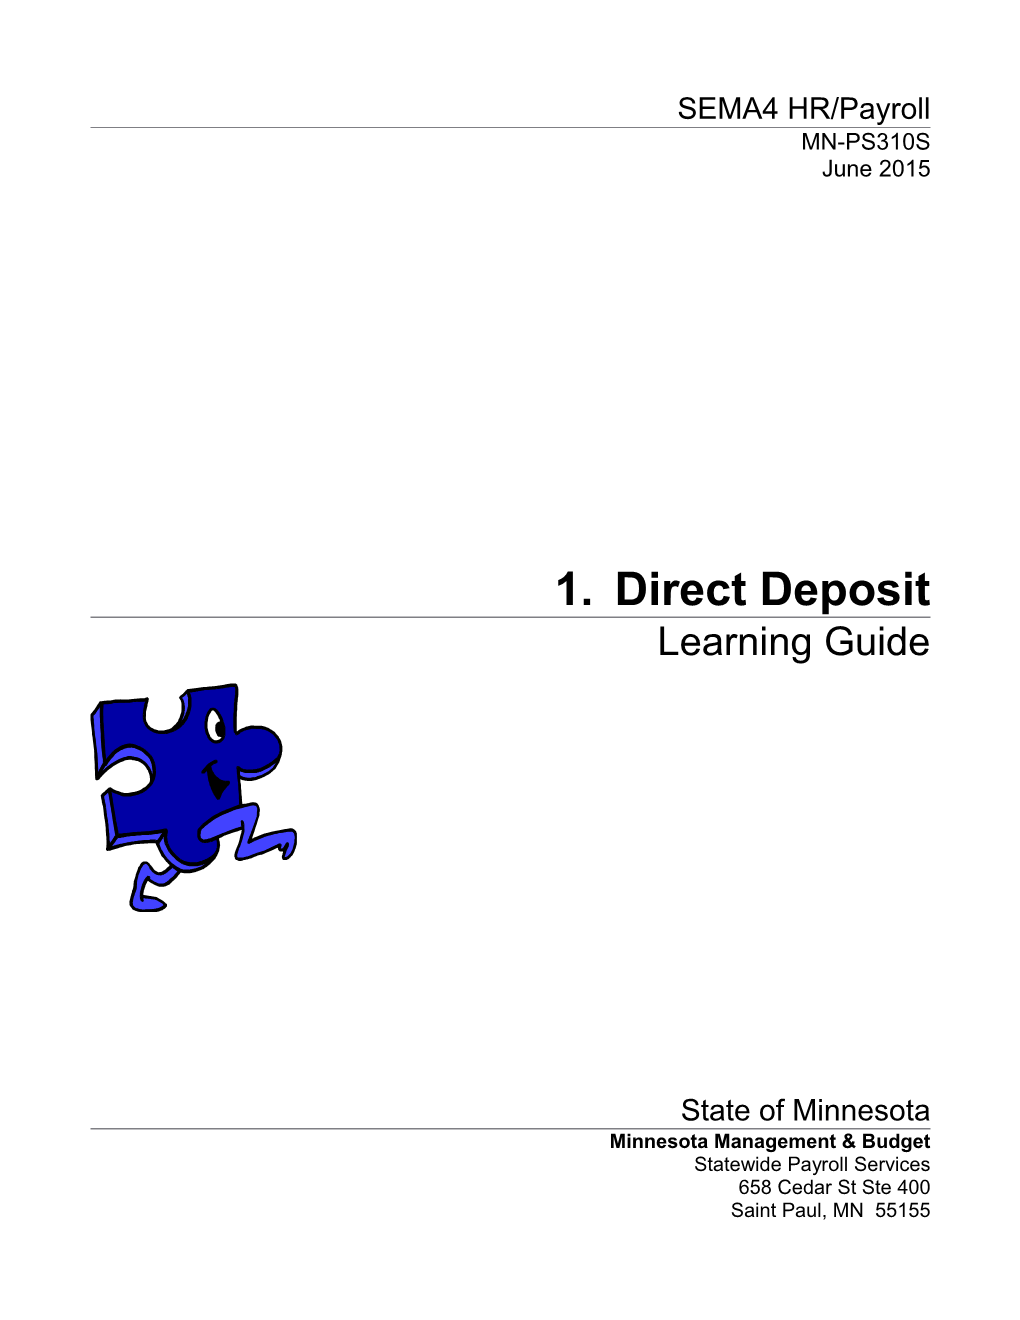 Direct Deposit Learning Guide